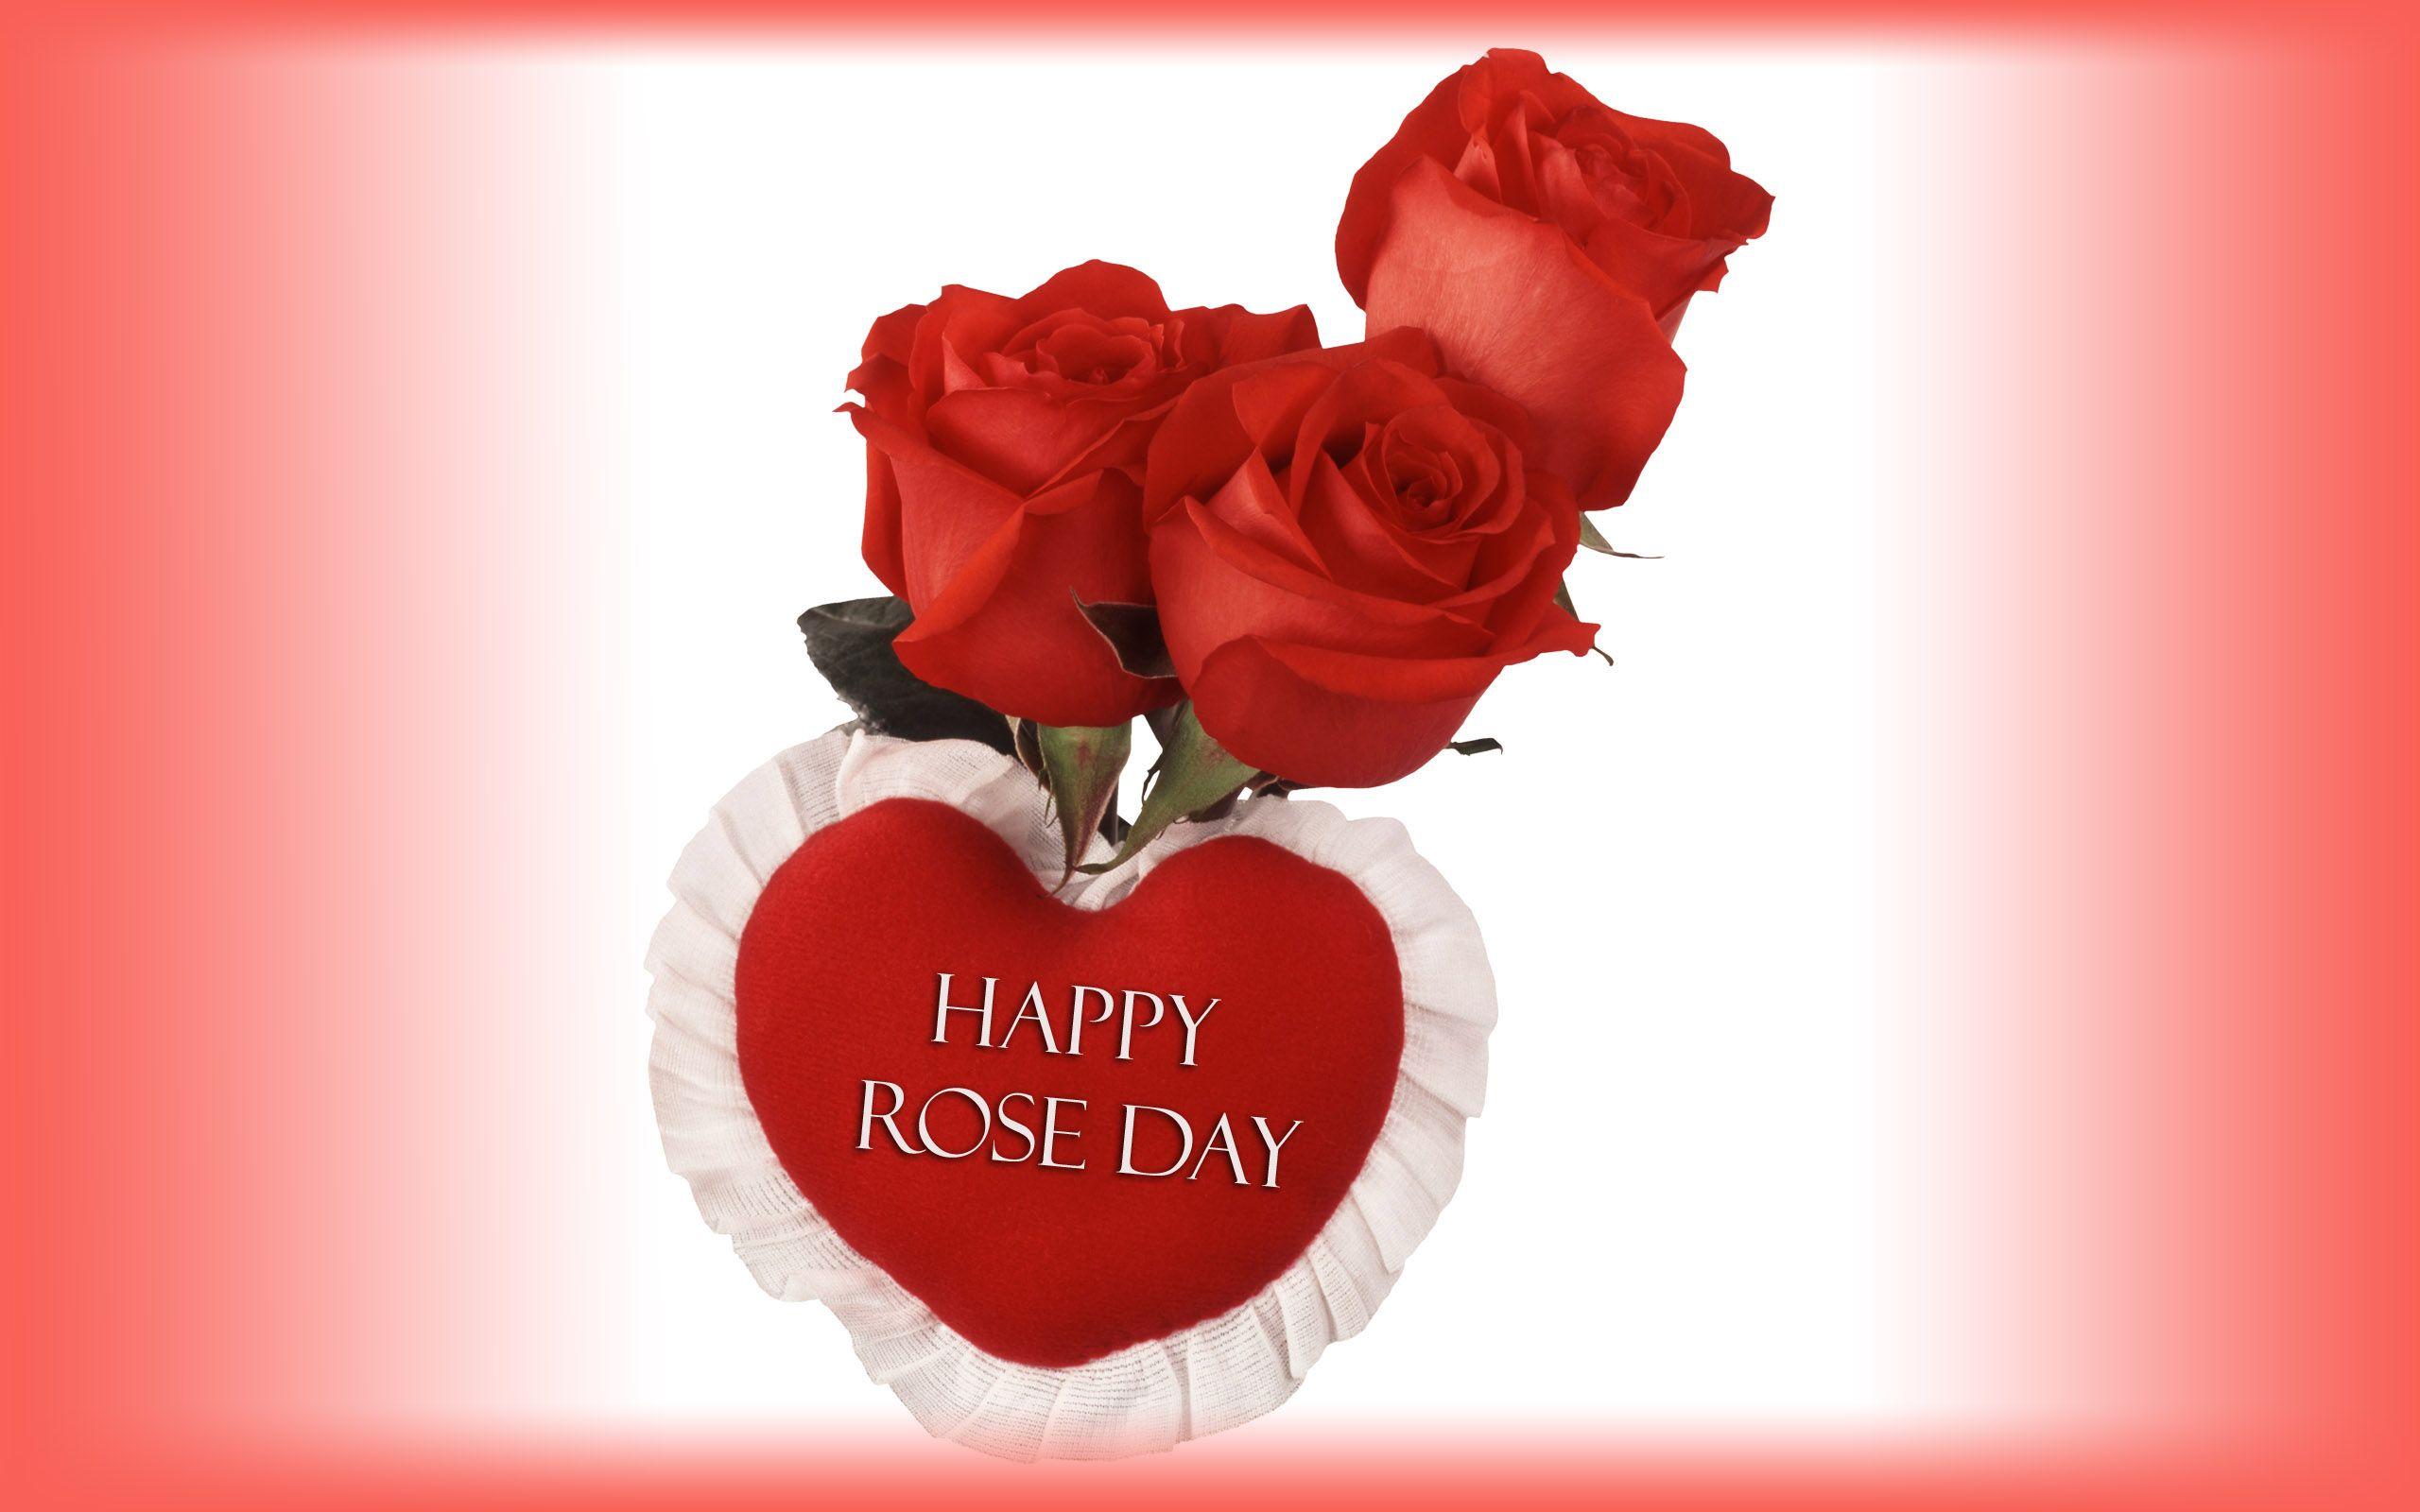 Happy Rose Day Image, Picture & Wallpaper in HD